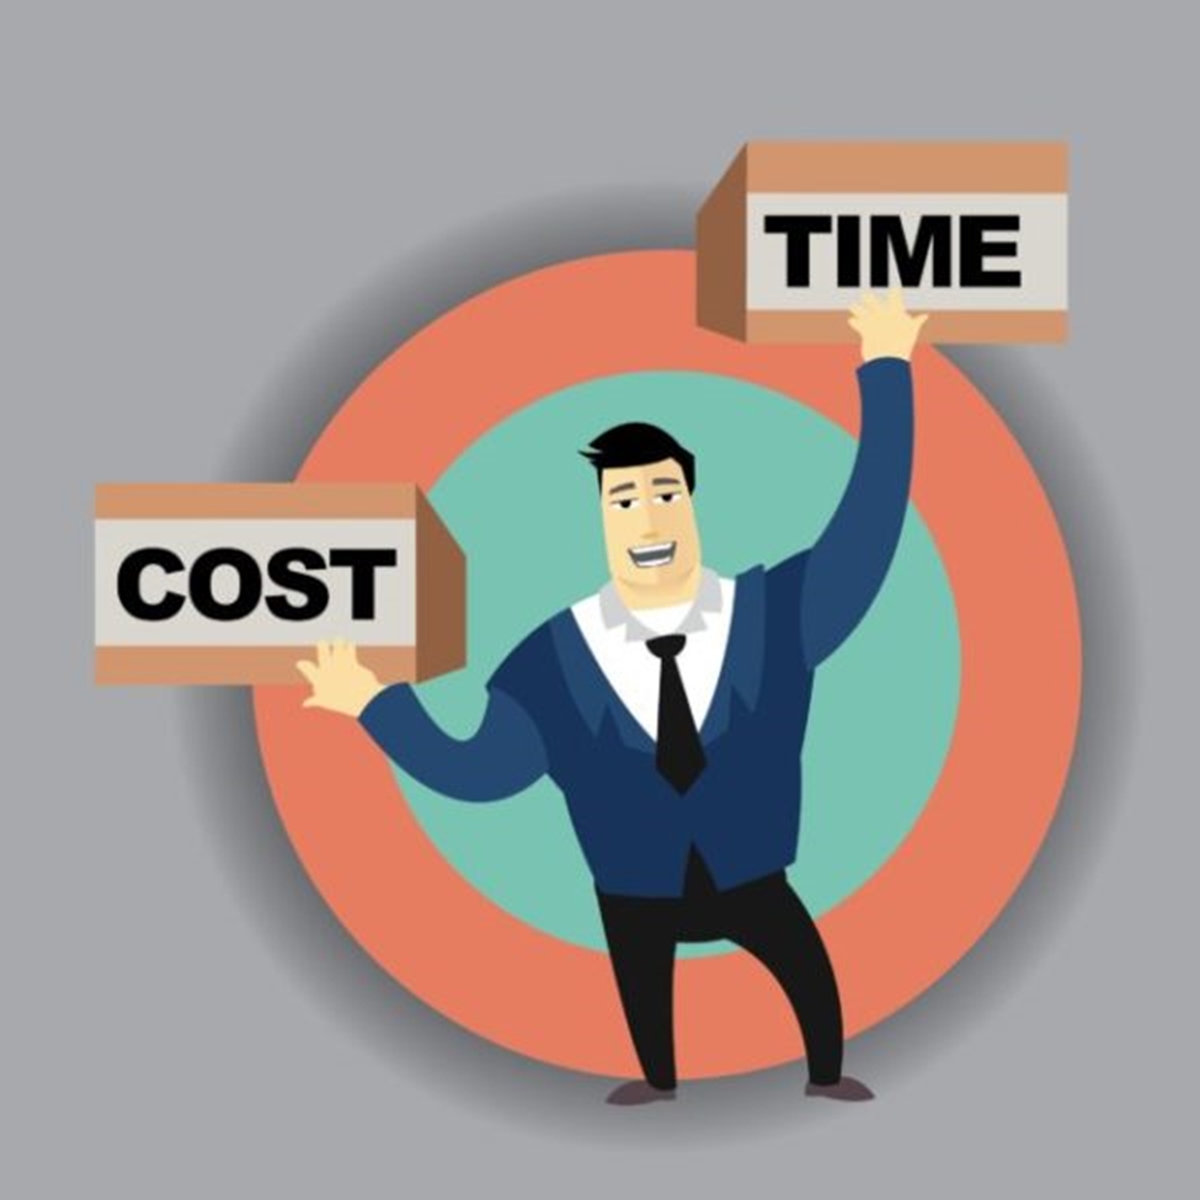 Inside sales is more cost-effective